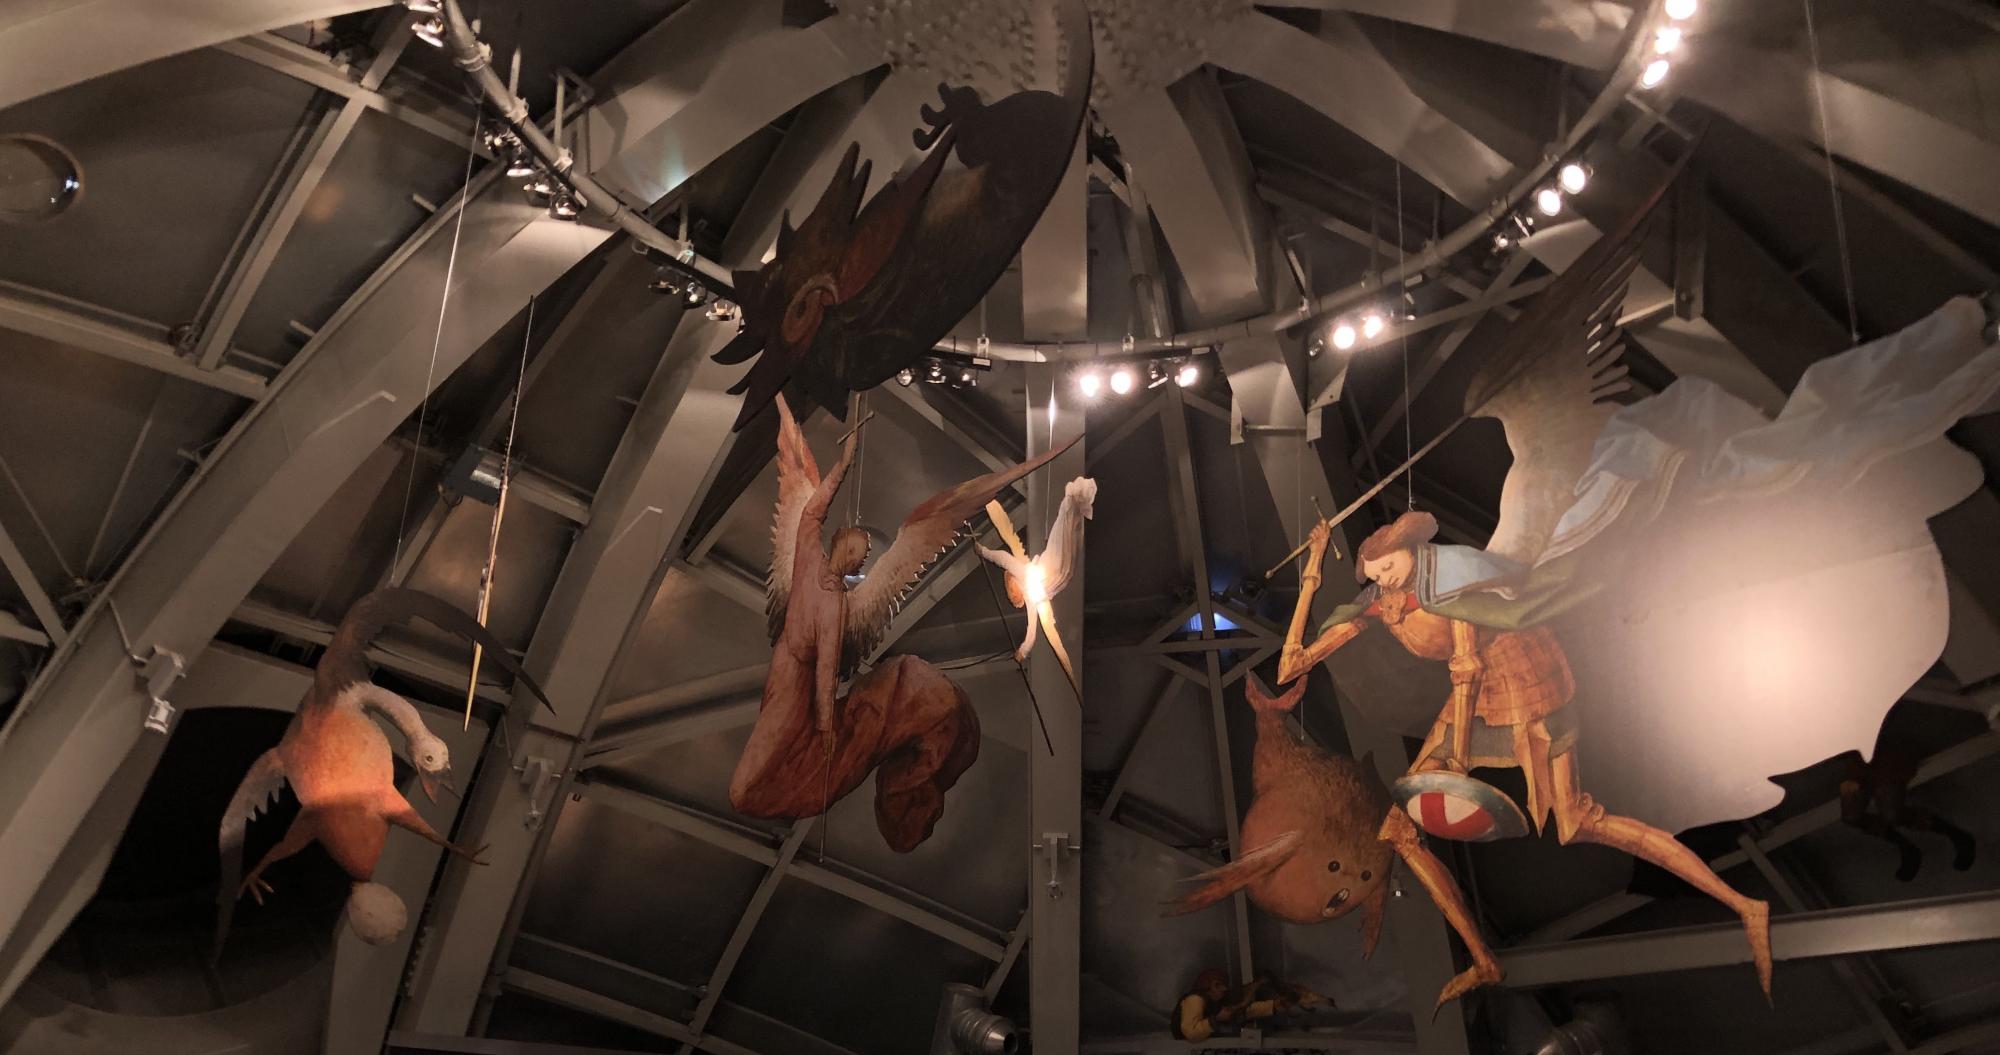 A hanging exhibit of various European mythical creatures cardboard cutouts